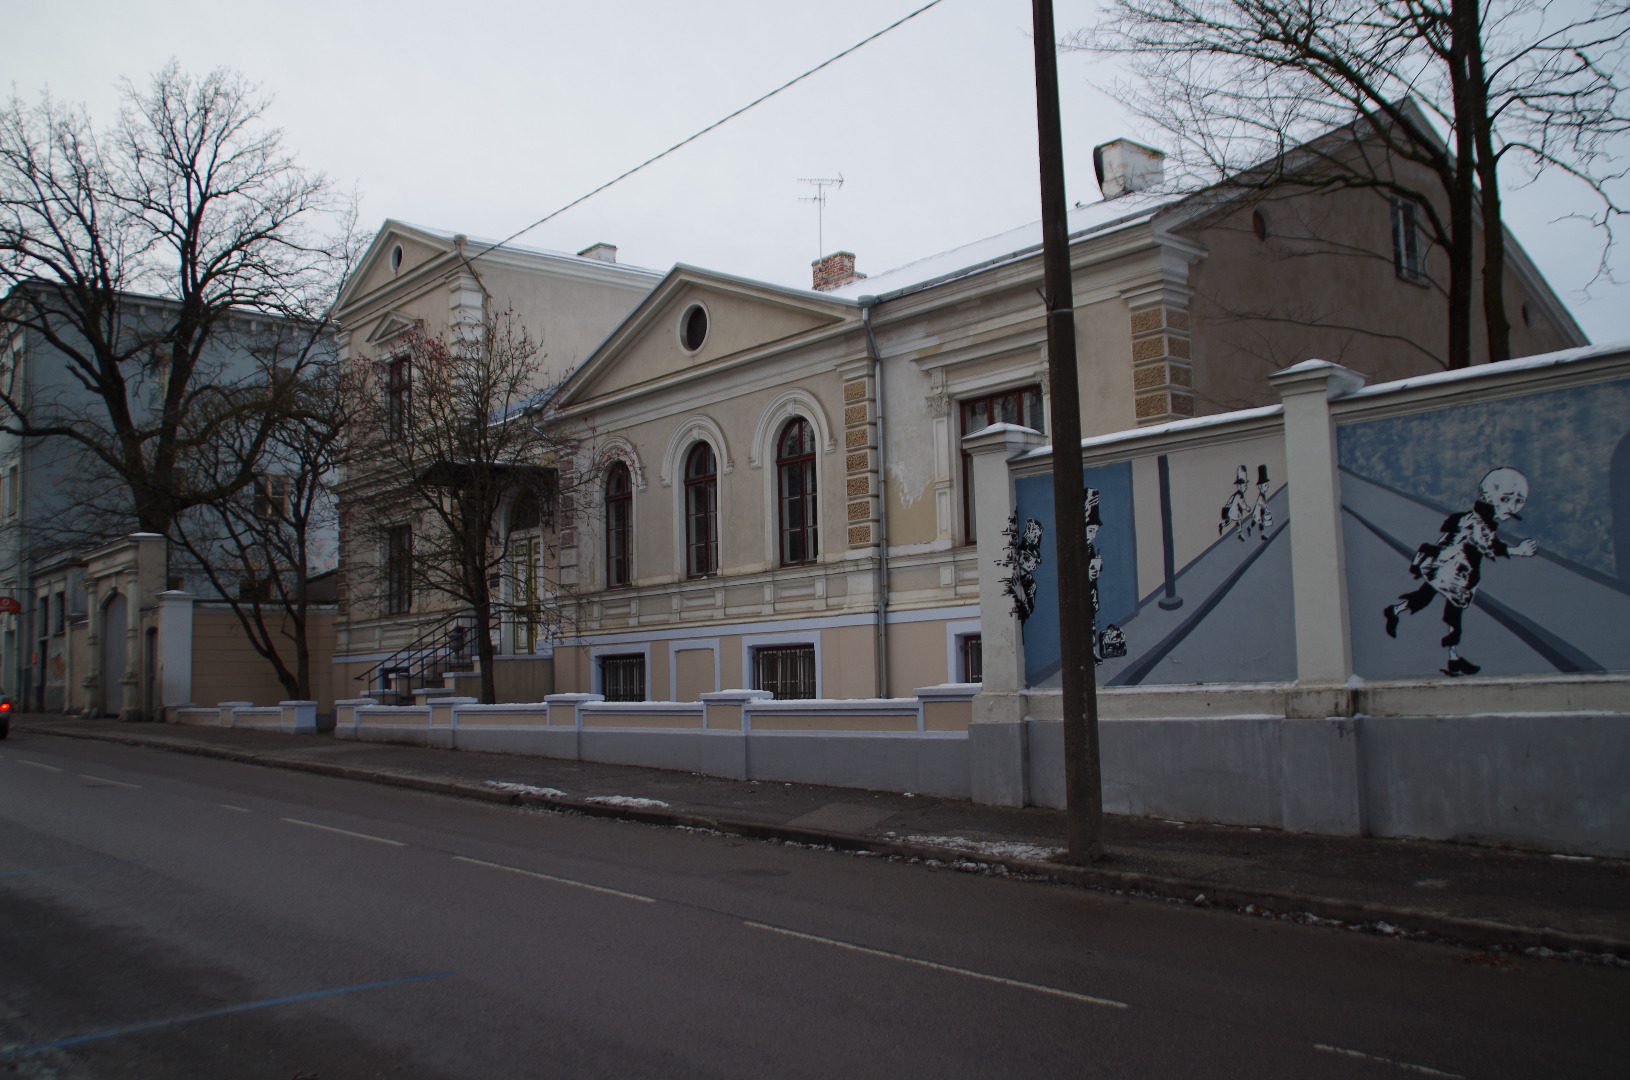 The former KGB house and the current Tartu Writers' House on Vanemuise Street rephoto